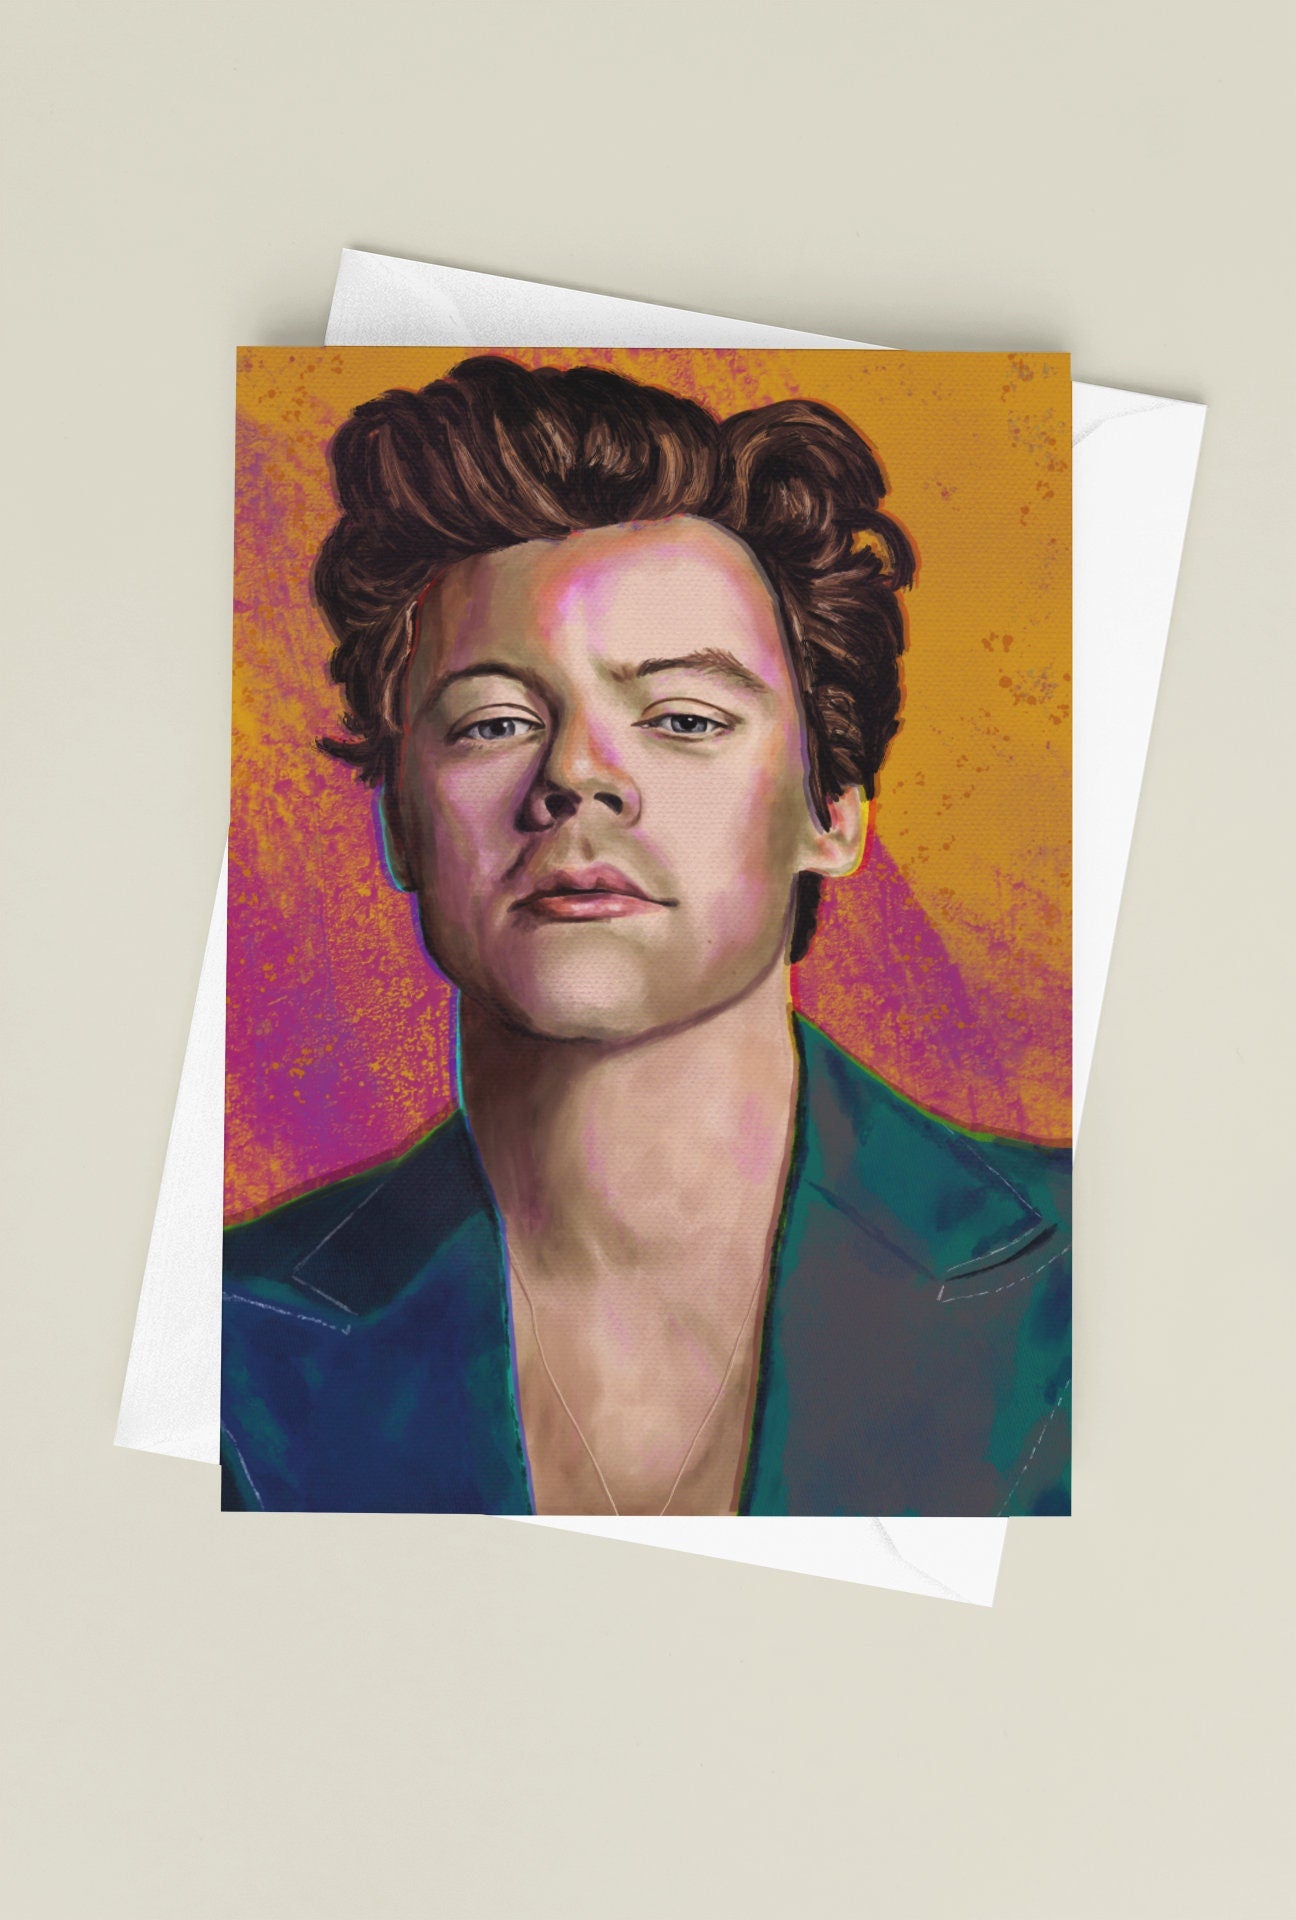 Harry Styles greeting card, One Direction card, Harry Styles fan gift, Harry Styles birthday card, personalised card, Harry Styles pop art